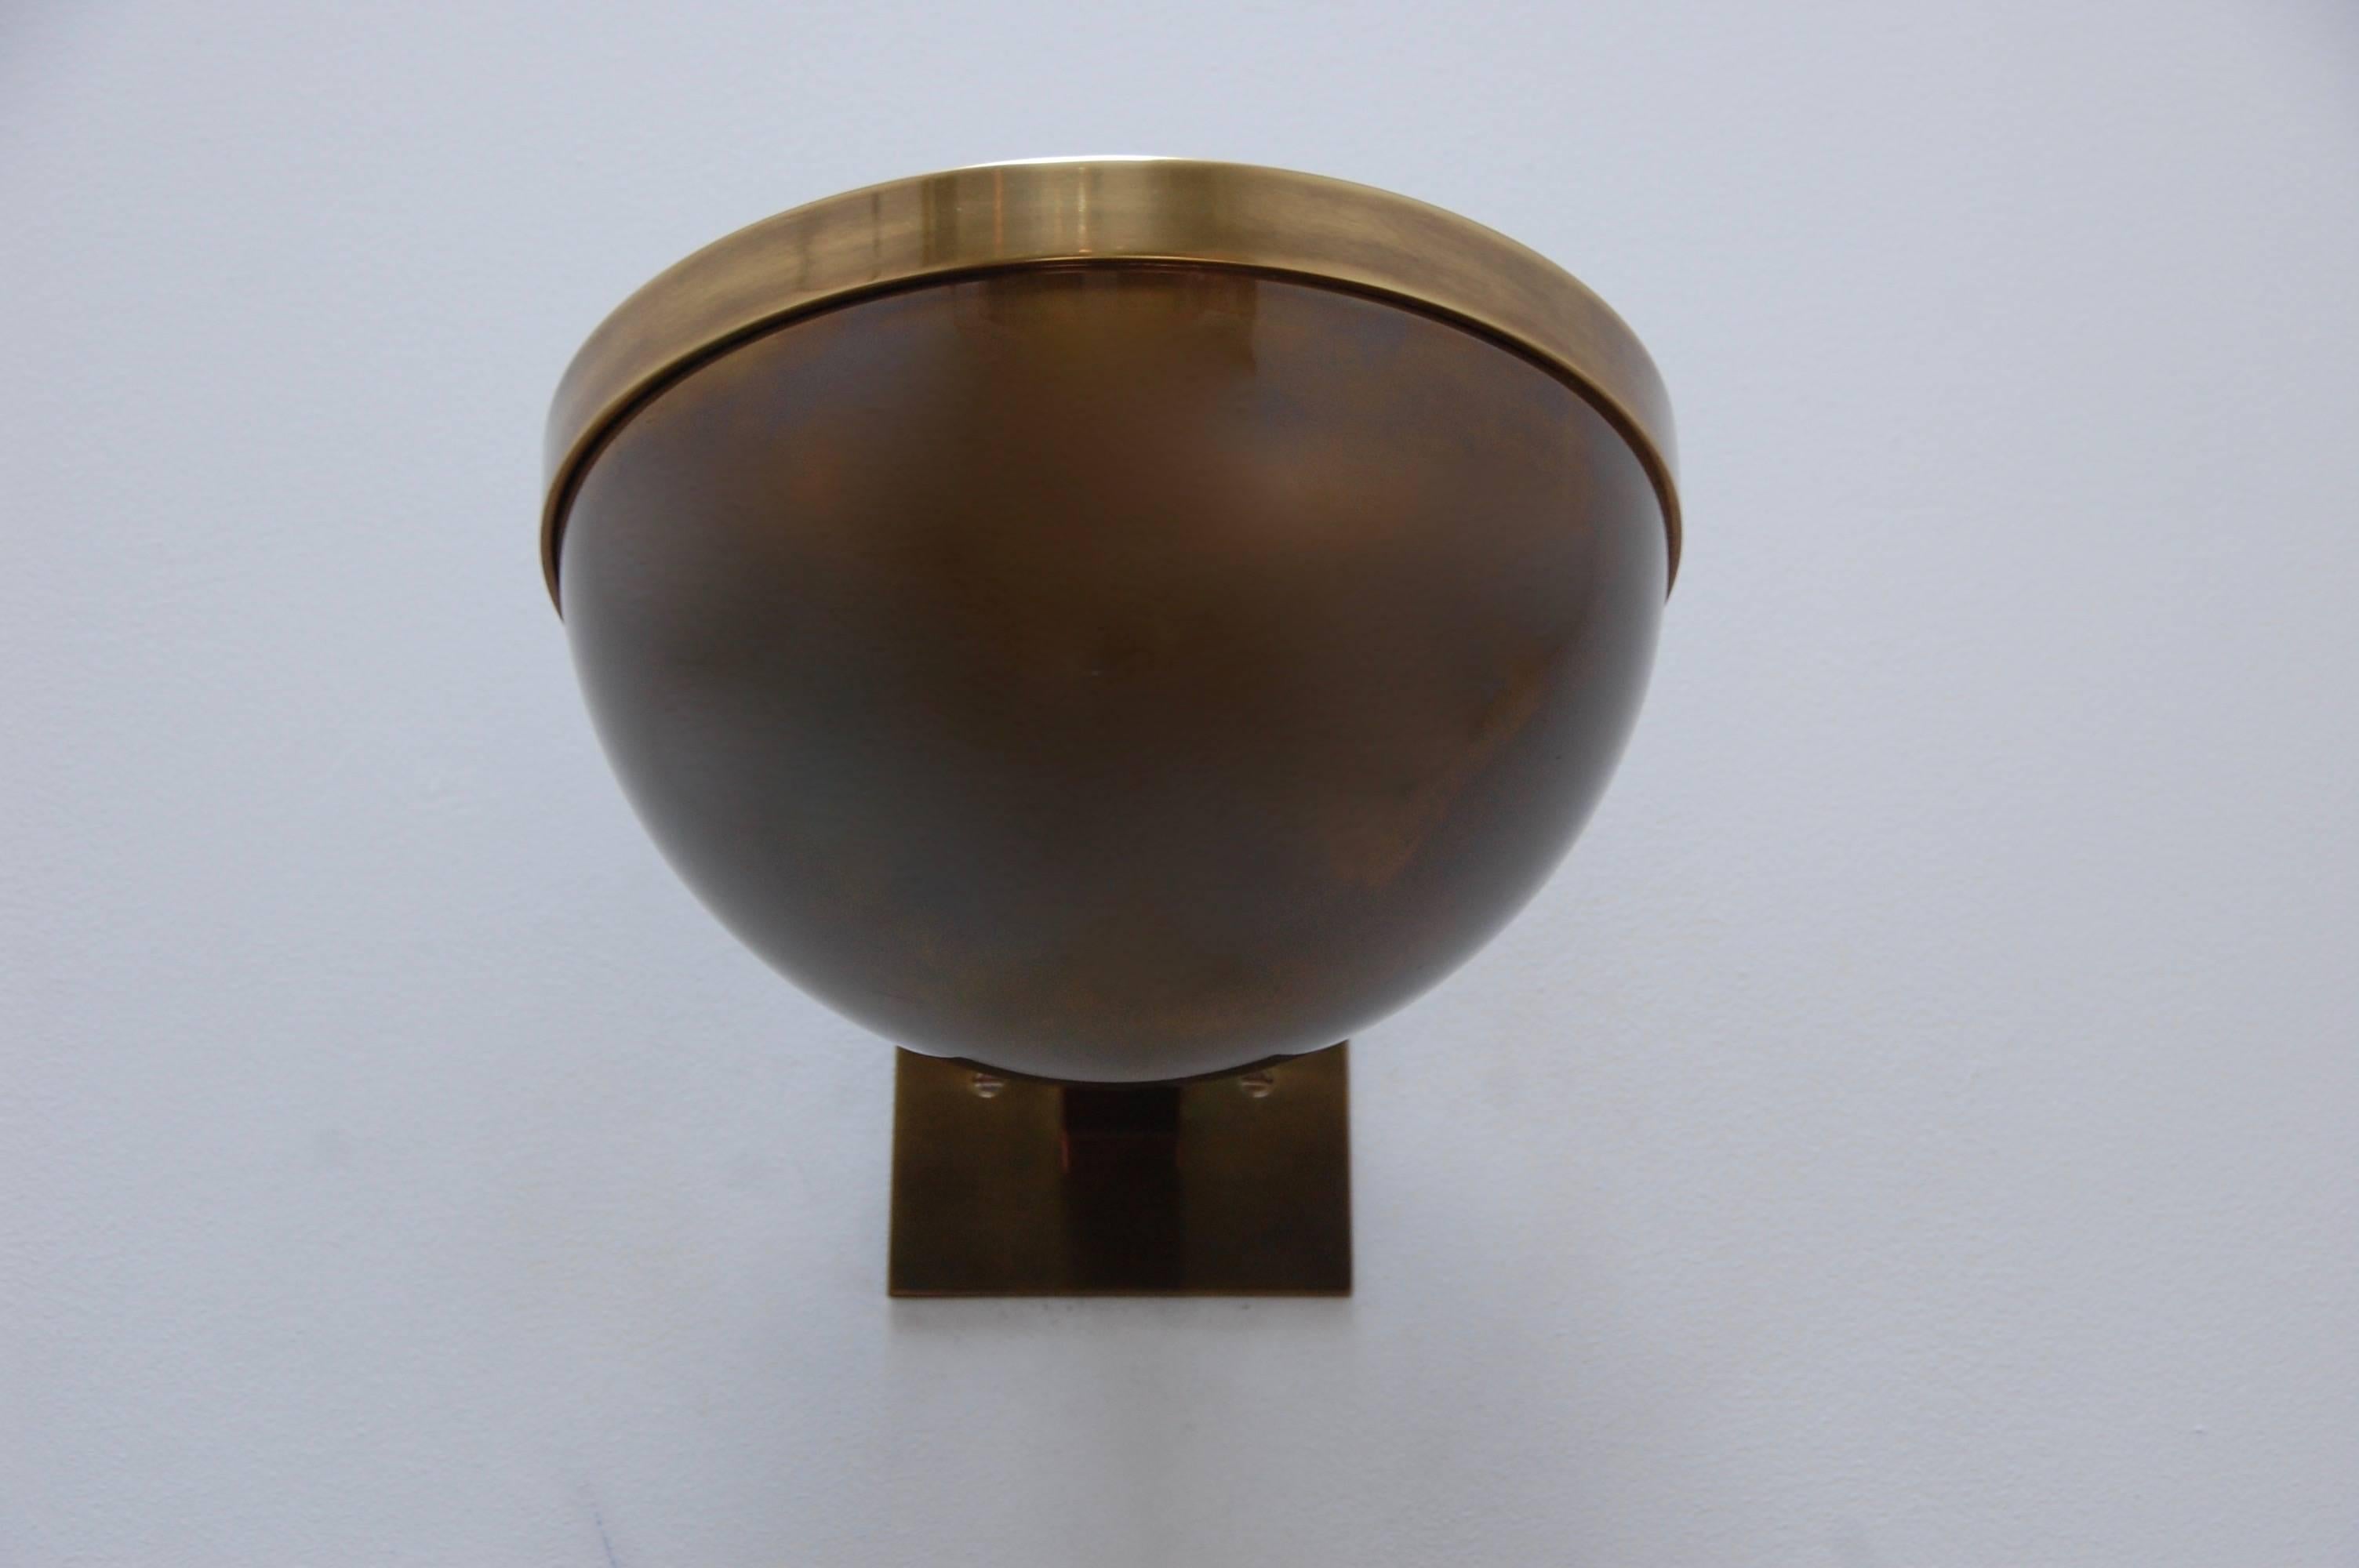 Fabulous and sleek modern Juni bowl sconce in solid aged brass. Manufactured by Lumfardo Luminaires, based on a French design. Single medium based E-26 socket. Multiples available to order. Lightbulb and mounting hardware supplied with order. 